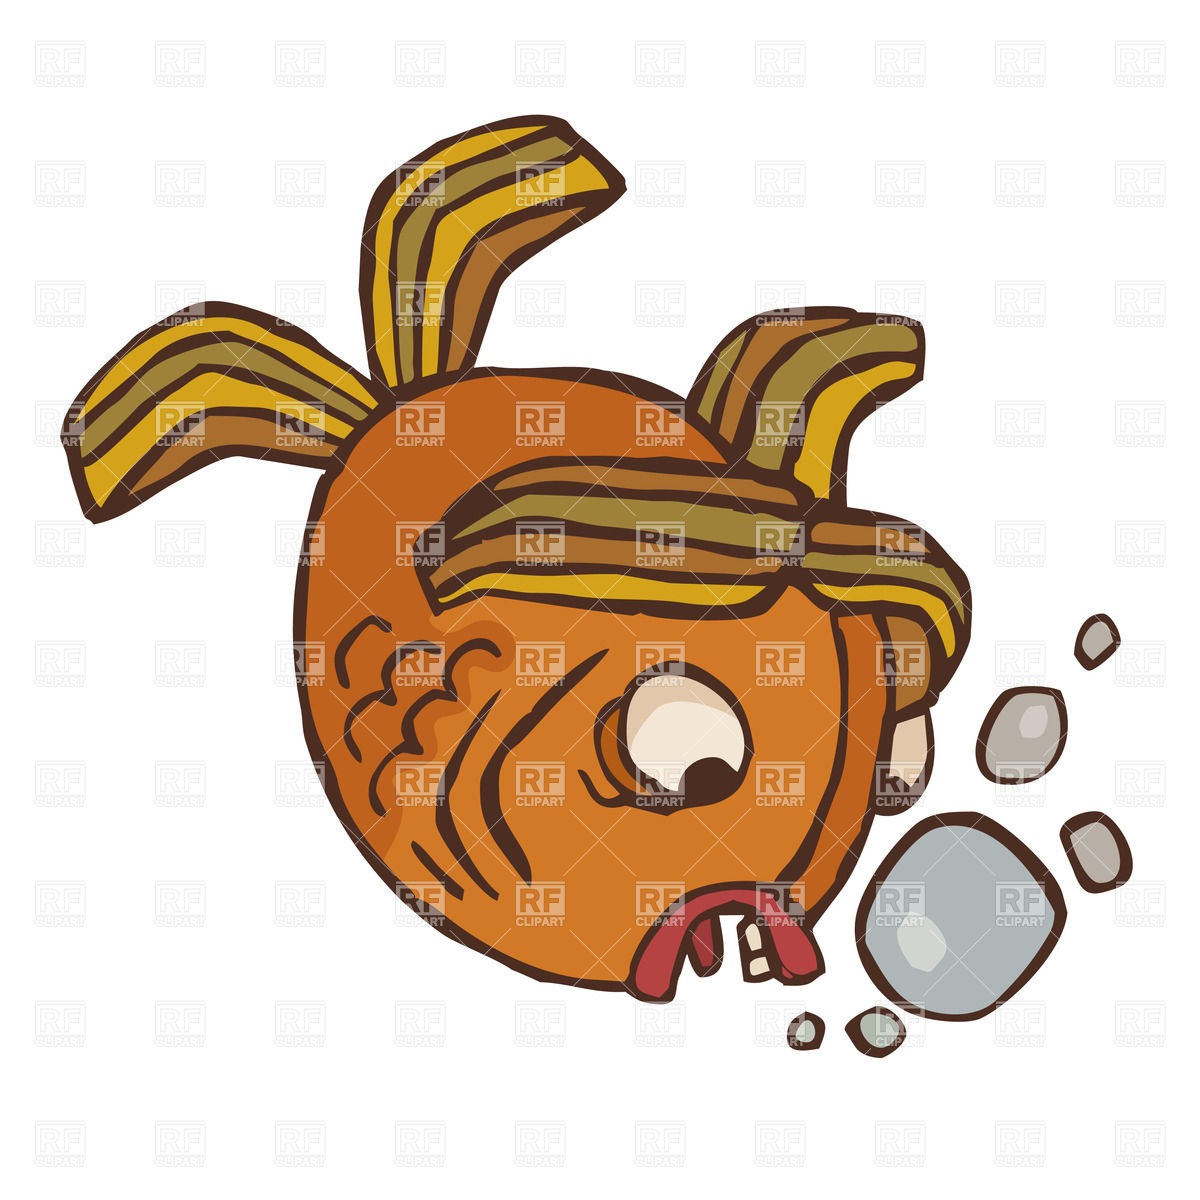 Strange Scared Brown Fish 37894 Download Royalty Free Vector Clipart